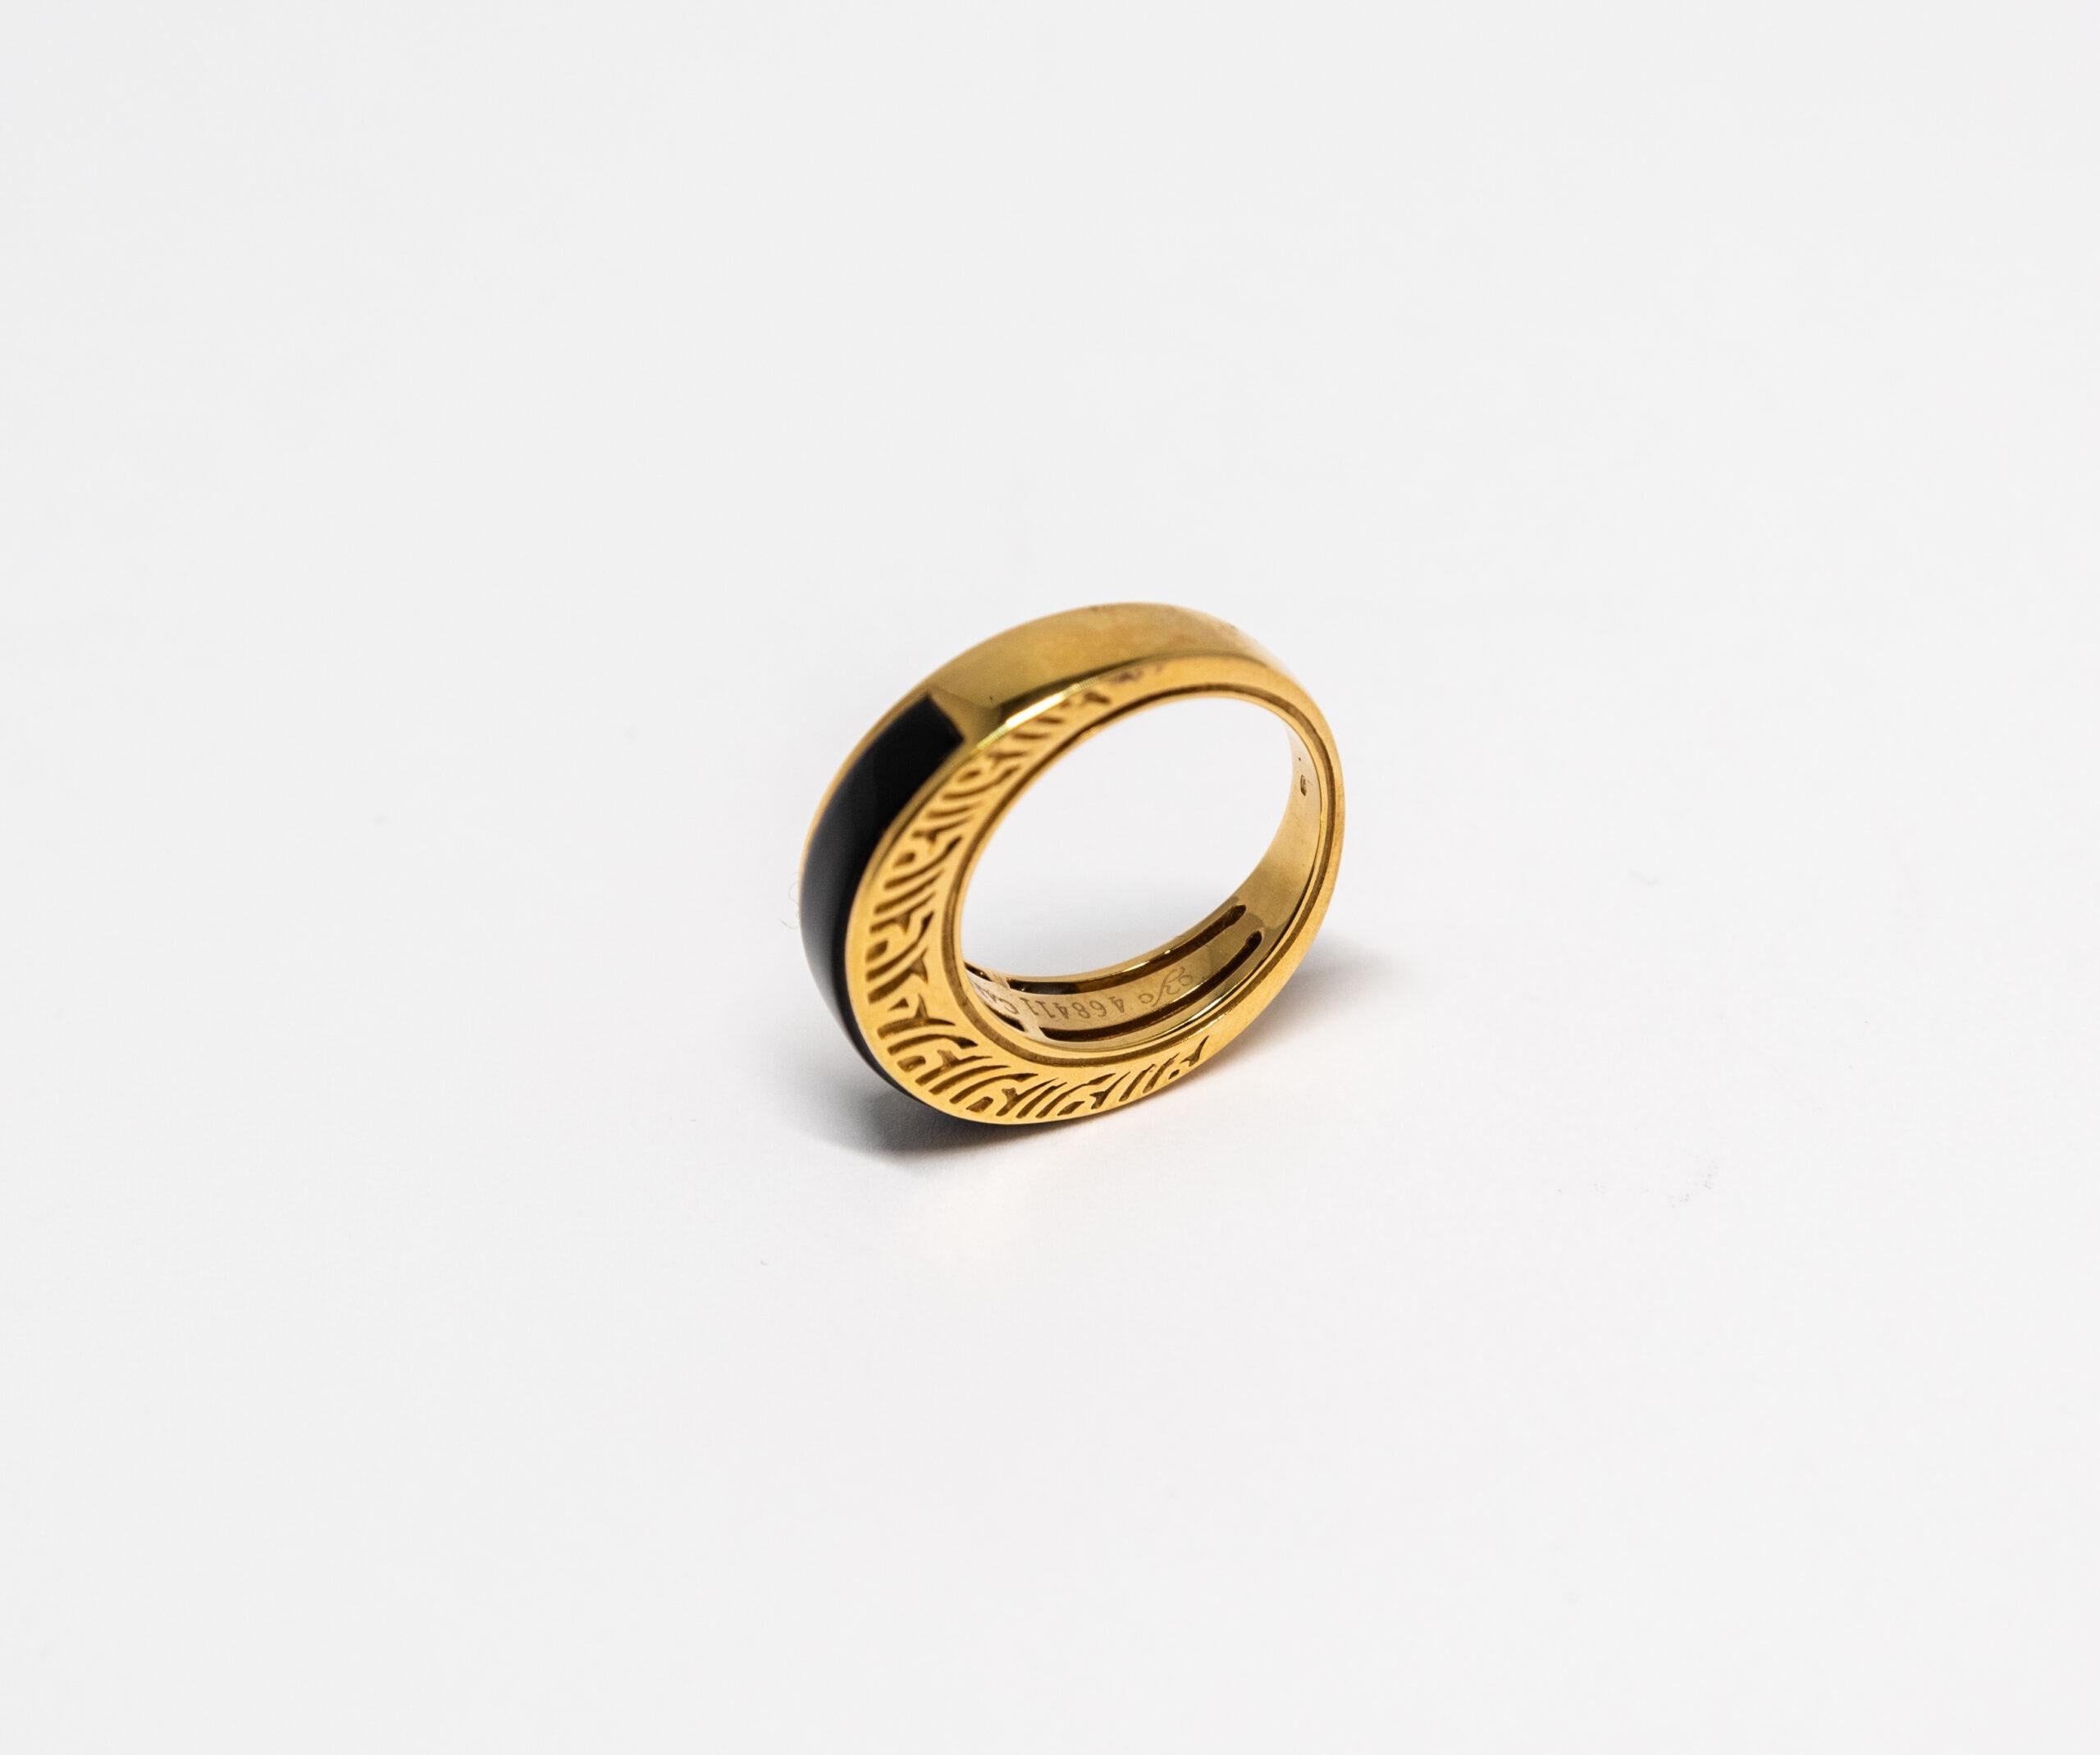 This ring is made of 18K Yellow Gold. The top of the ring is decorated with Black Onyx (1.00 un).

Size – 55 (7 US)